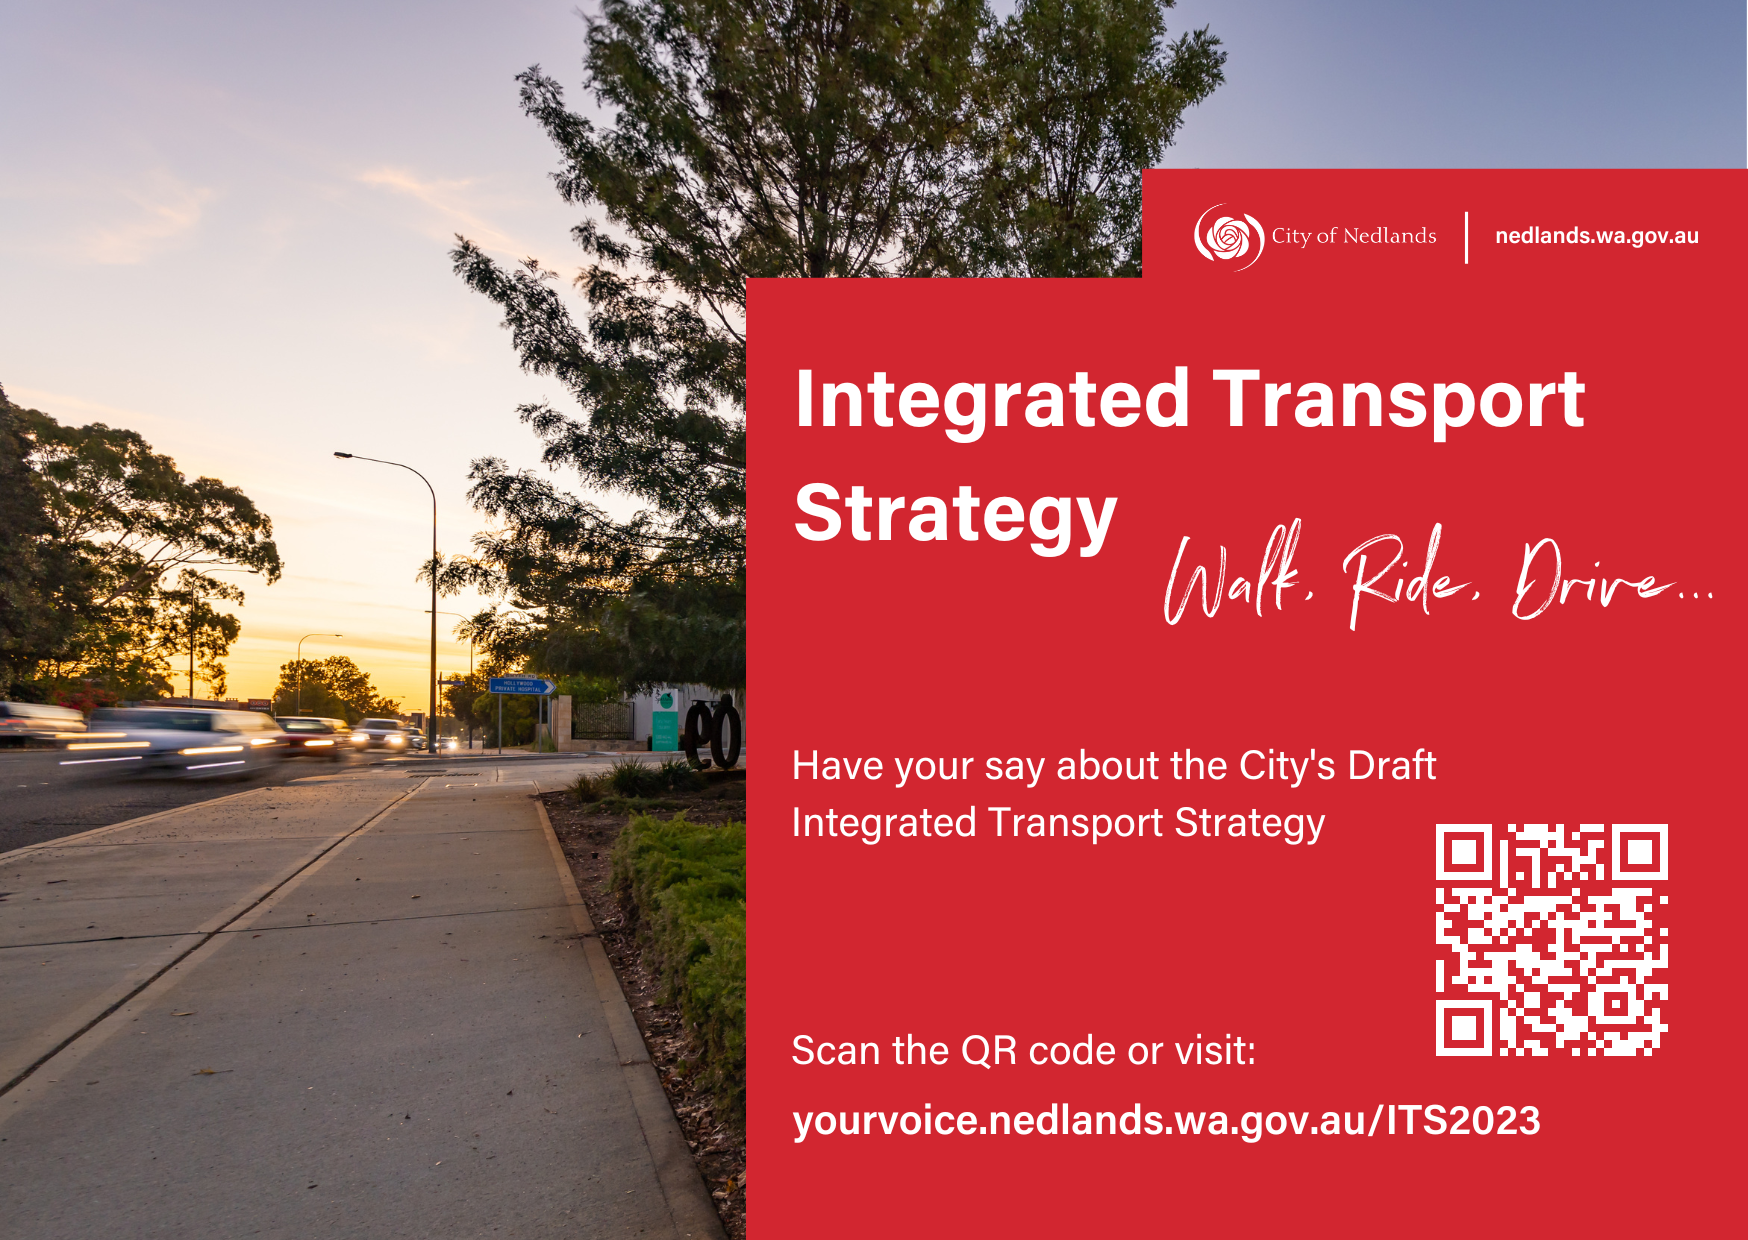 Draft Integrated Transport Strategy open for Community Consultation